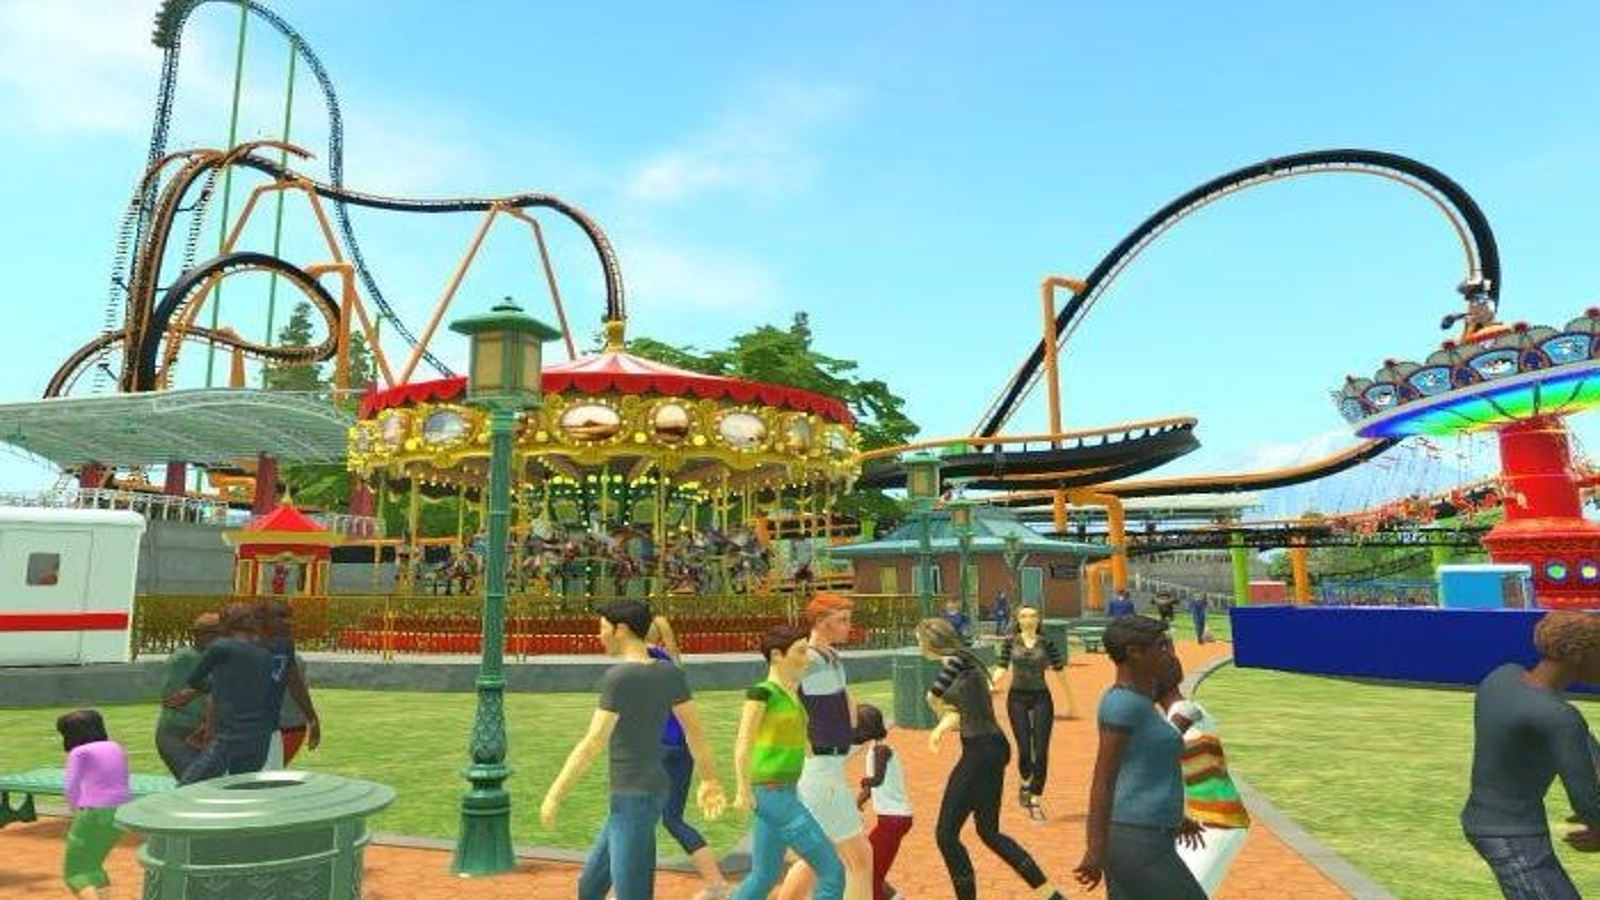 LGR - RollerCoaster Tycoon World Is Sad [A Review] 